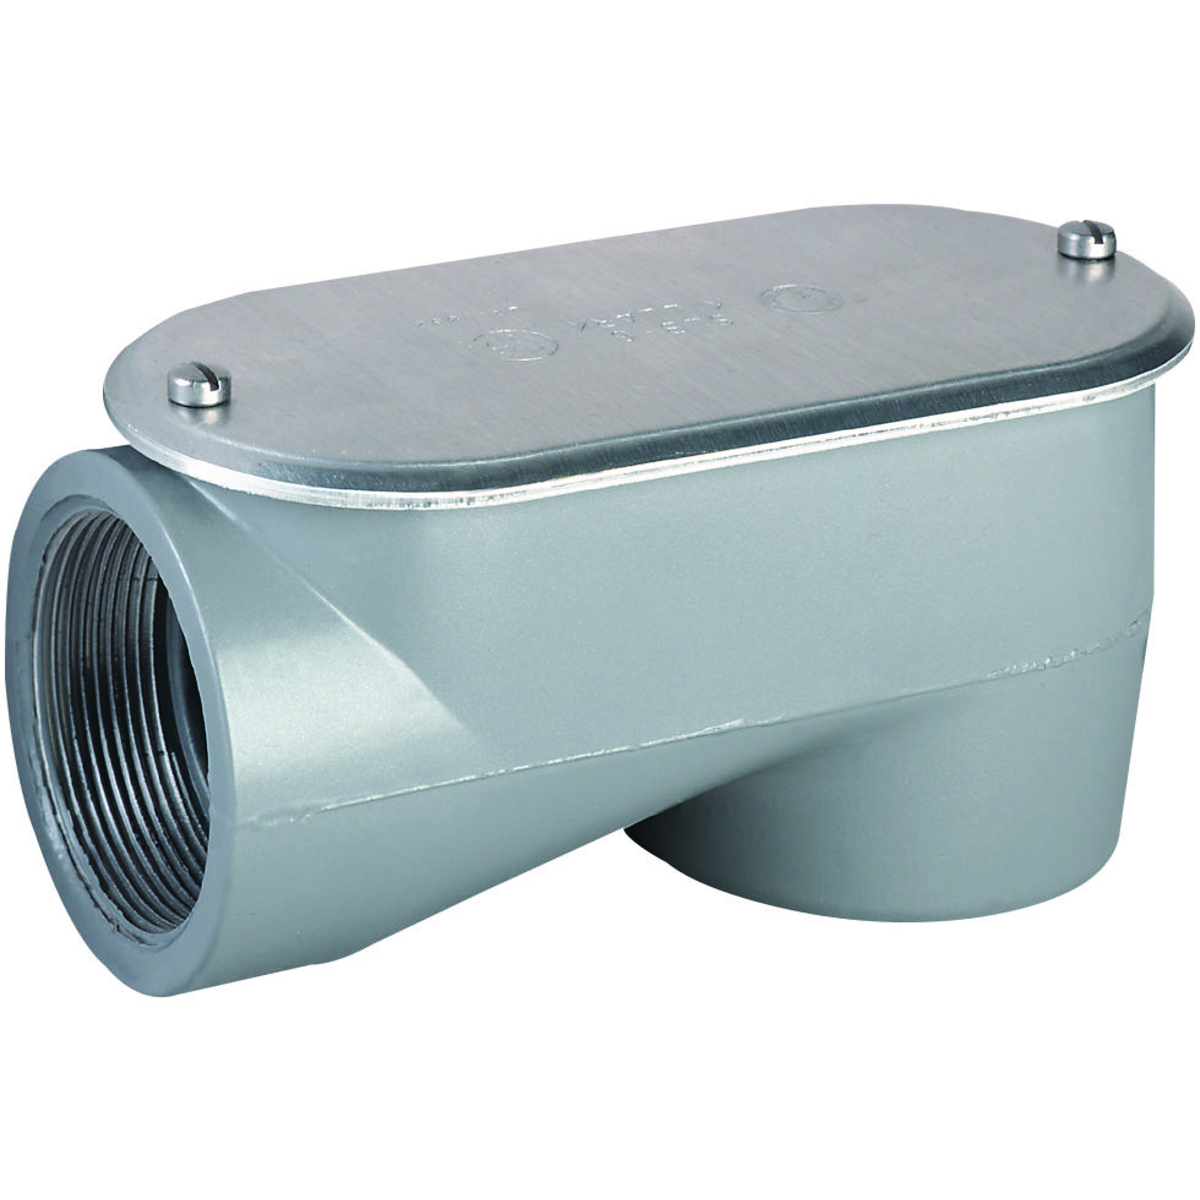 SLB SERIES - ALUMINUM SERVICE ENTRANCE BODY WITH COVER AND GASKET - HUBSIZE 3/4 INCH - VOLUME 2.9 CUBIC INCHES